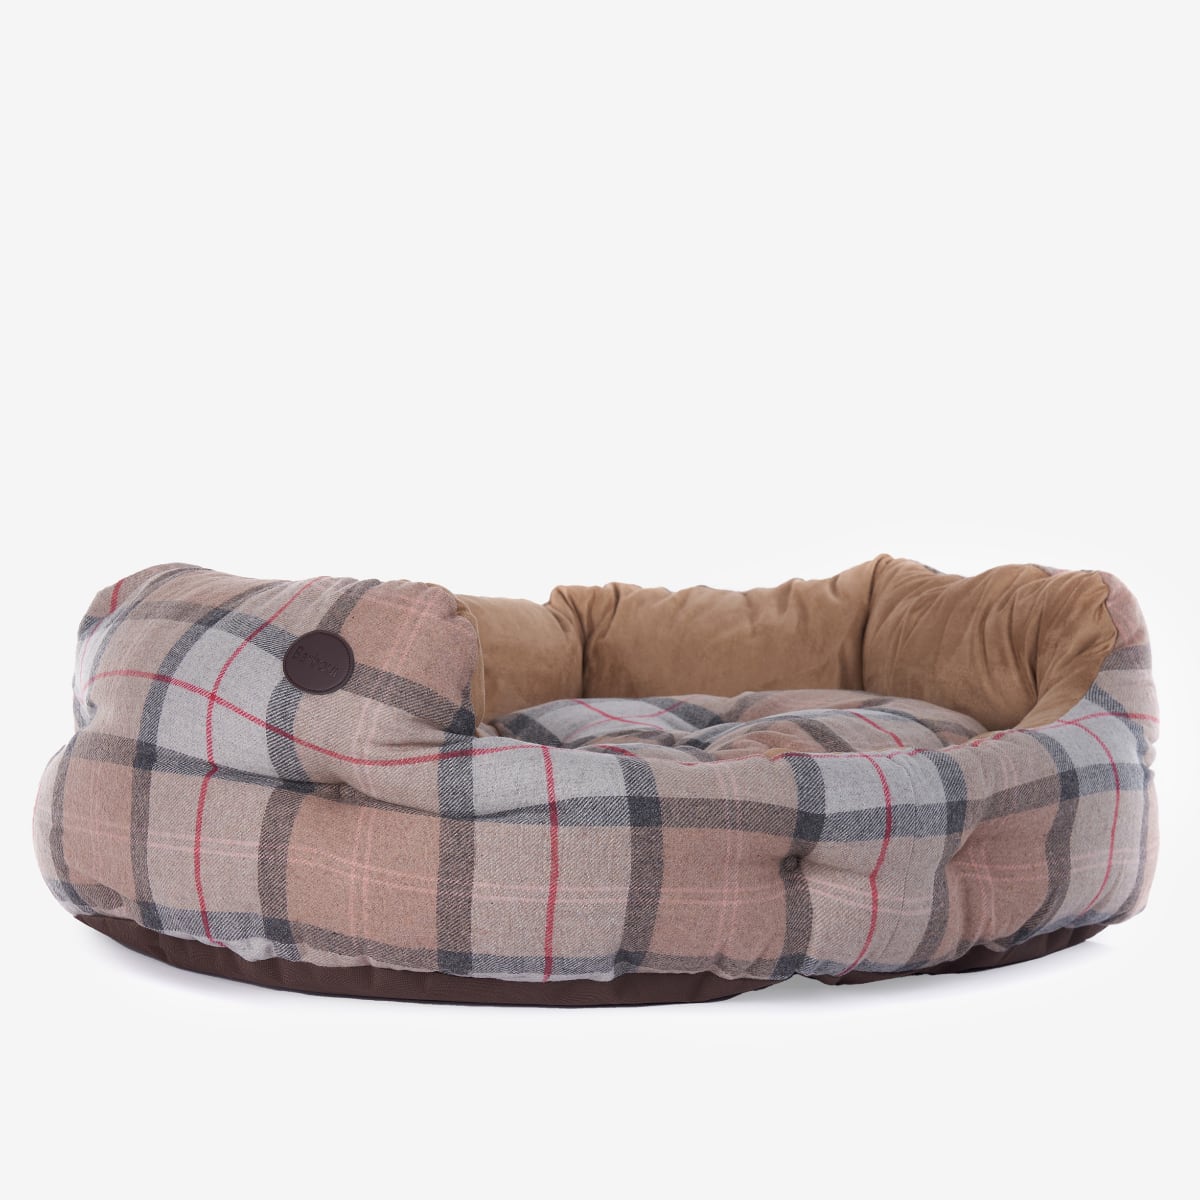 Barbour Luxury Dog Bed 35 Inch  | Taupe|Pink Tartan